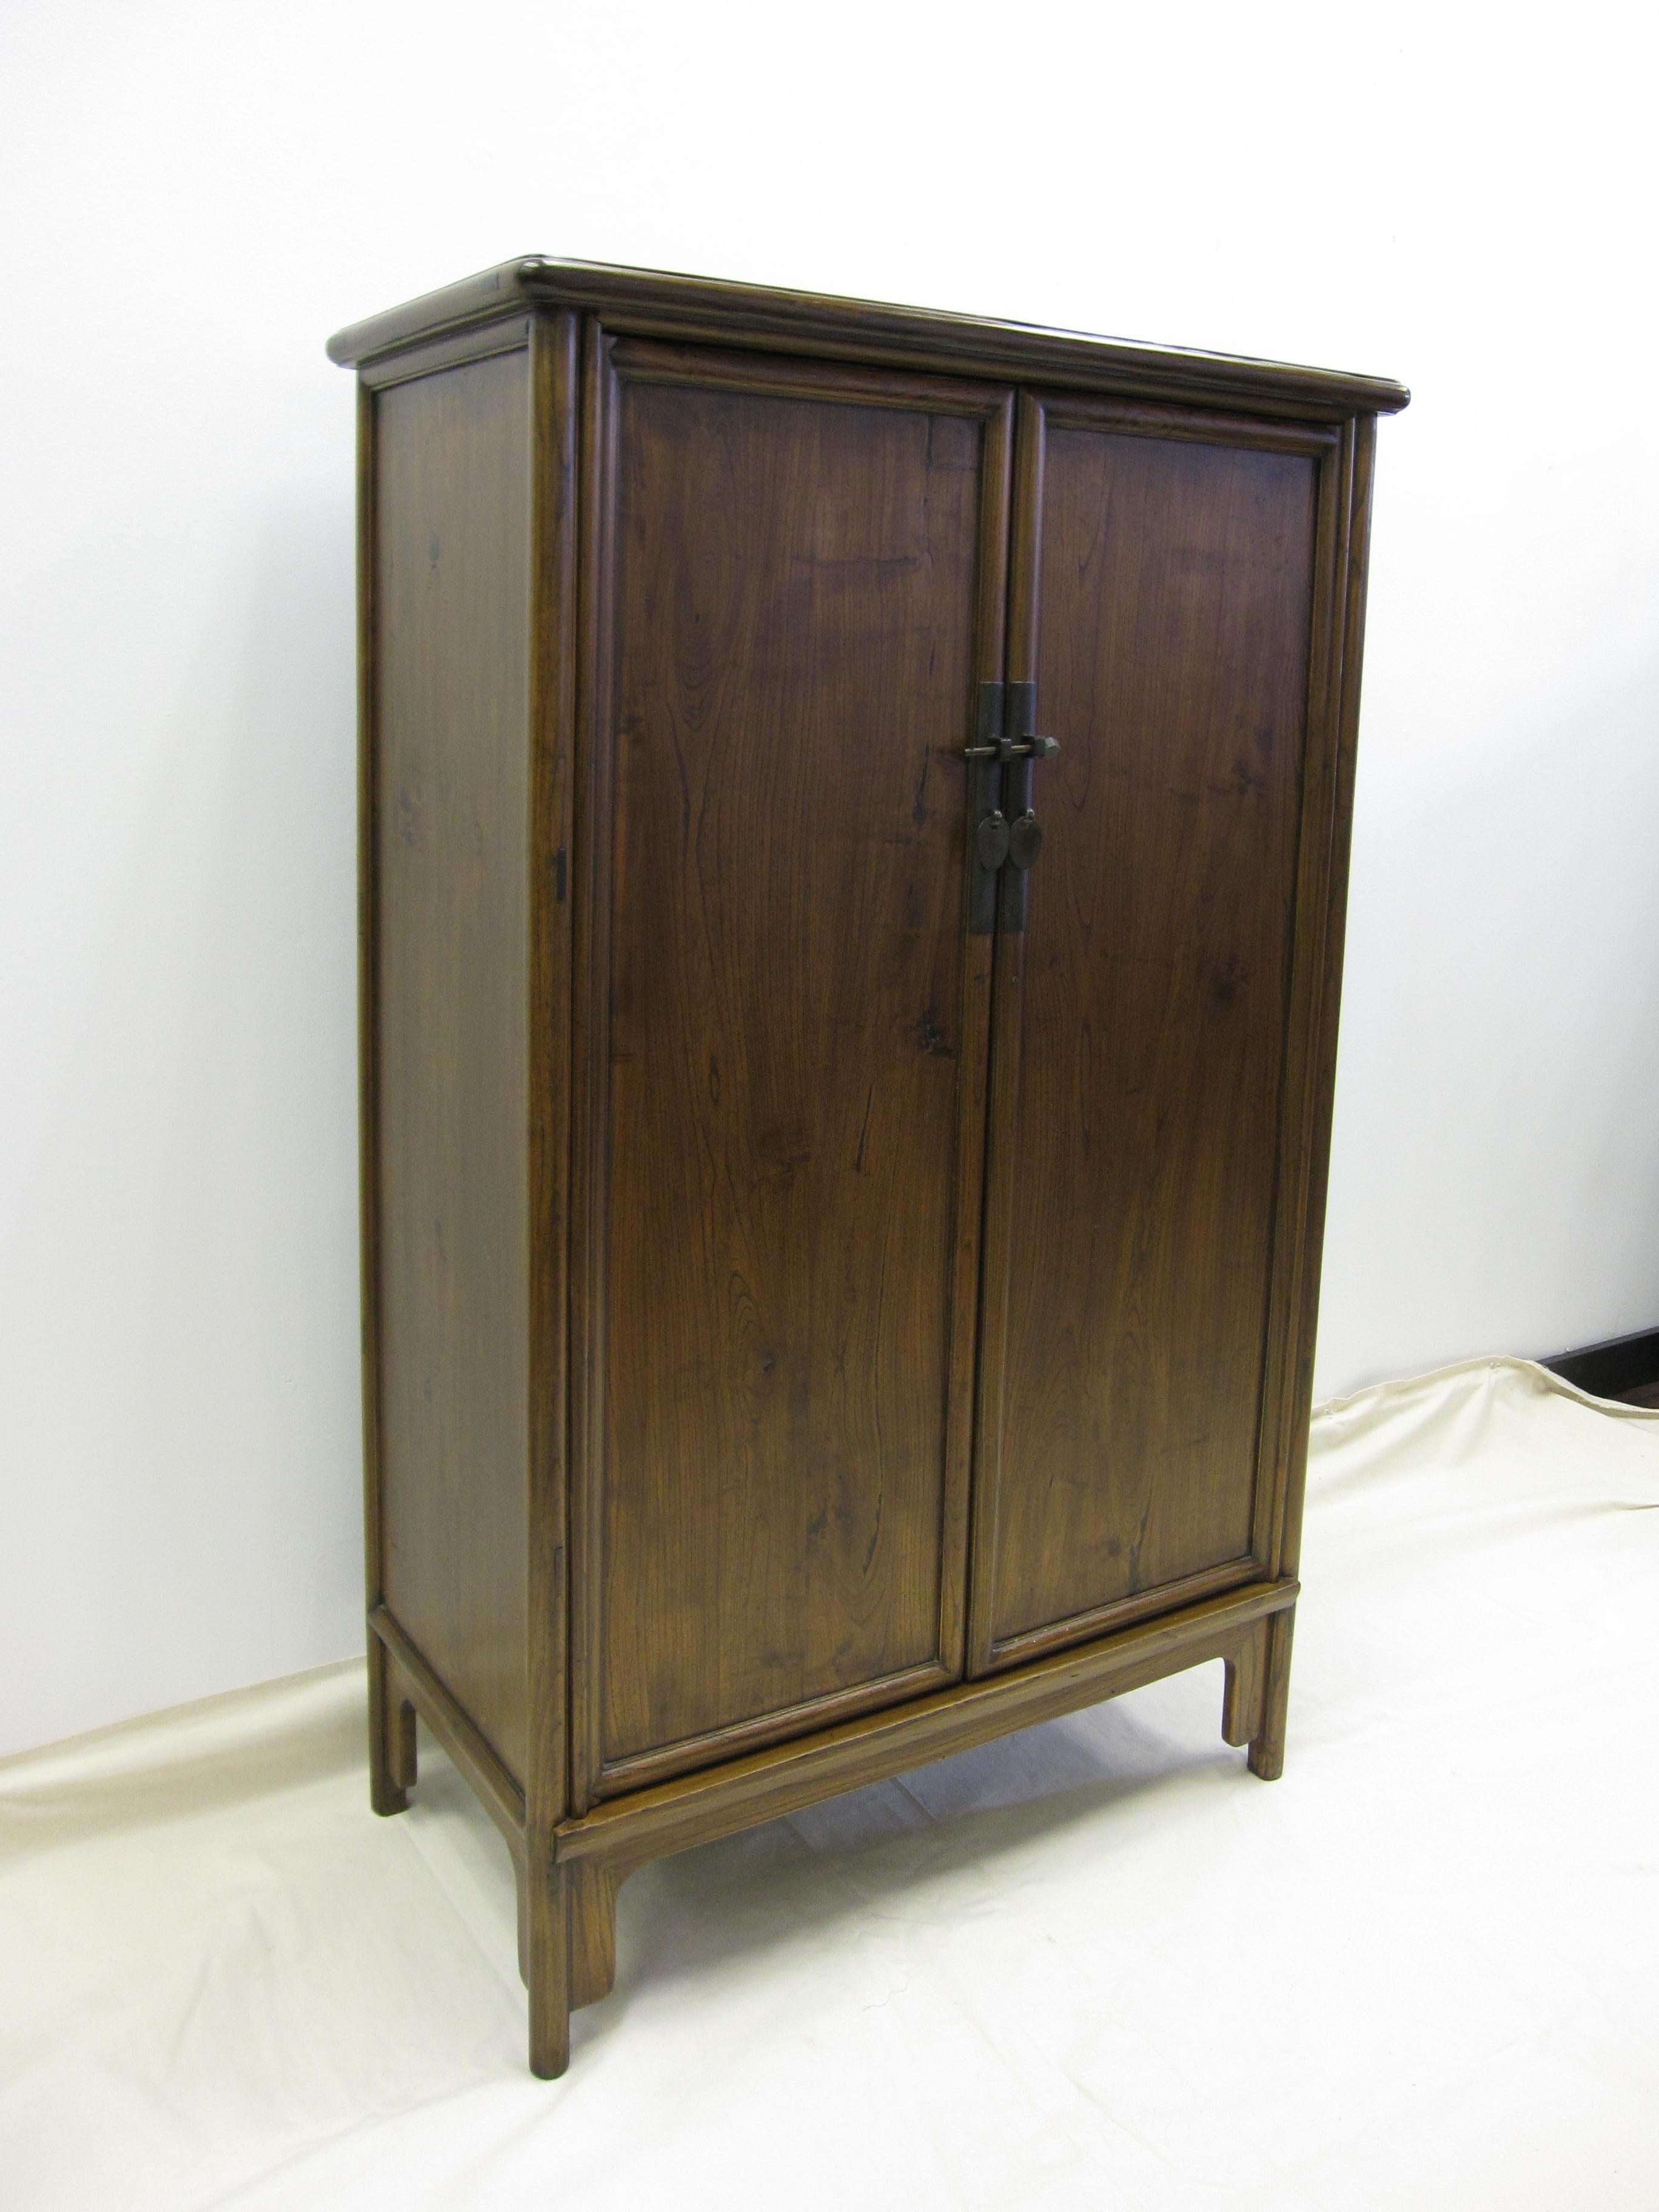 Antique Chinese tapered cabinet. Solid elm wood with round corner details, tapering 33 at the top to 34 at the bottom. Classic Chinese tenon and mortise joinery of a past century having a modernist and minimal style today.  Two drawers inside with a